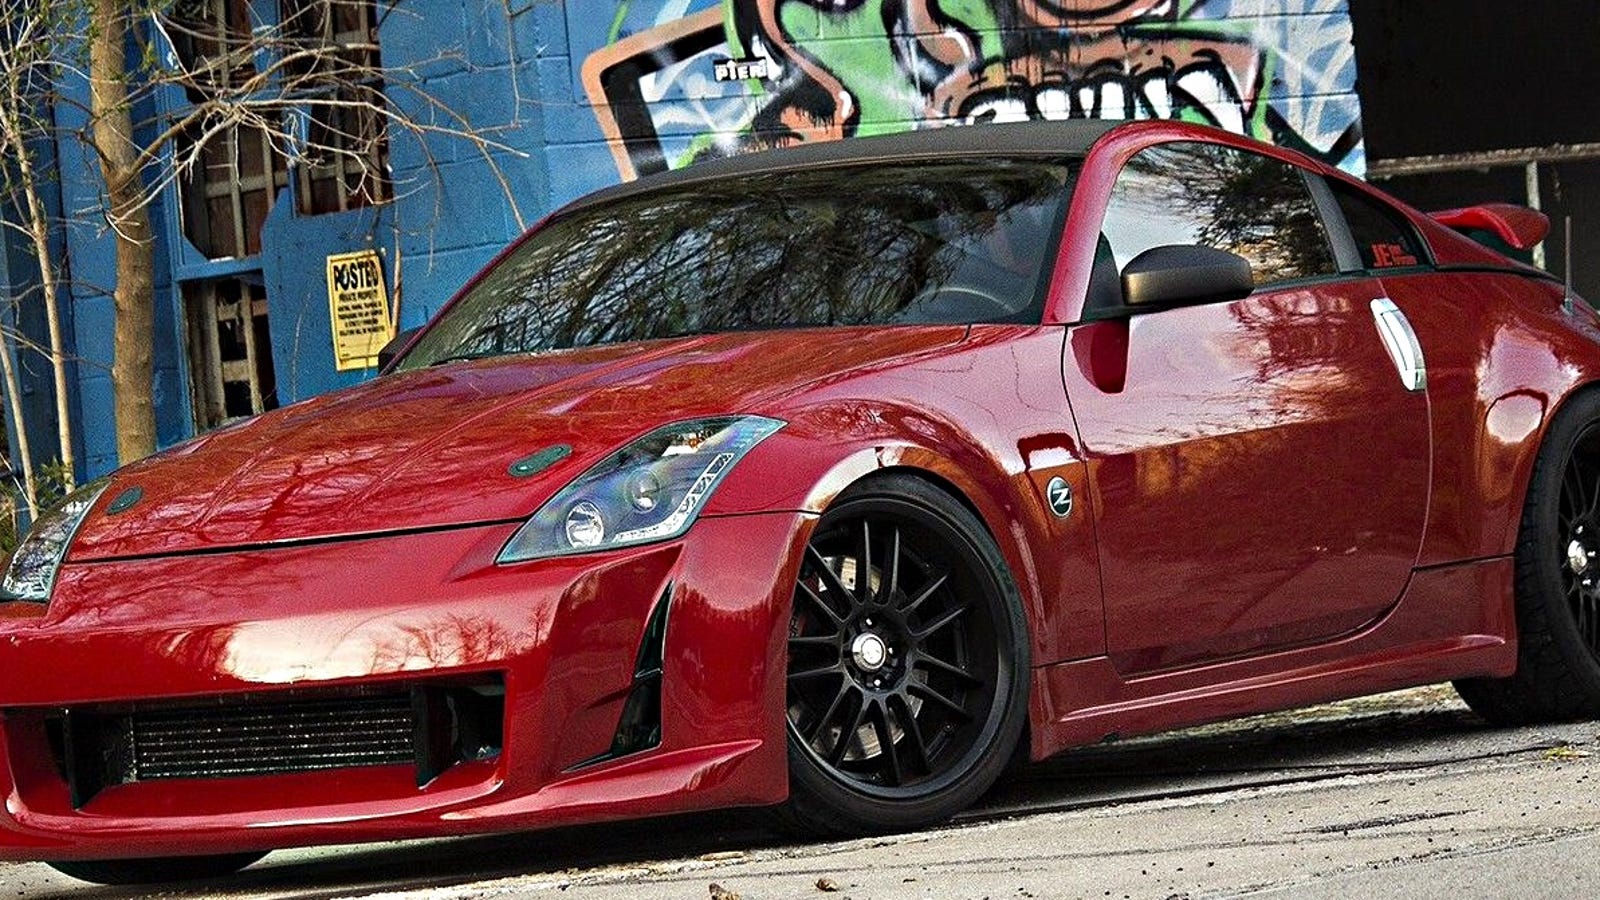 Ten Of The Best Modified Cars You Can Buy On eBay For Less Than $20,000